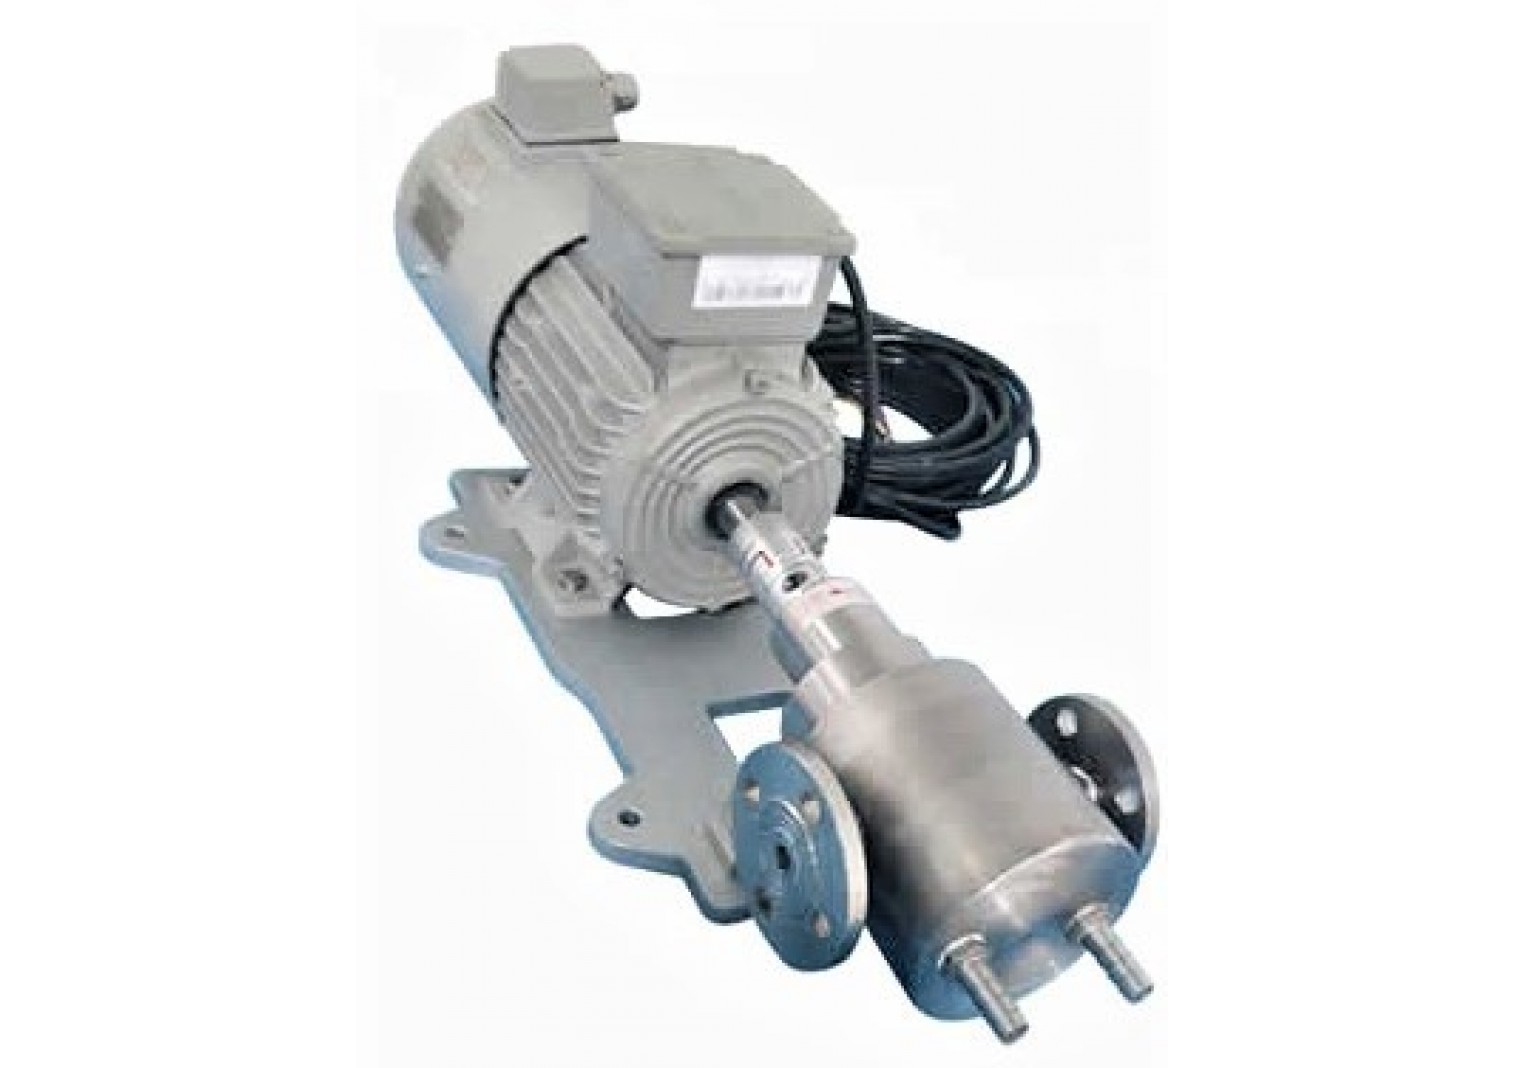 Jacket Gear Pump For Grease JL108